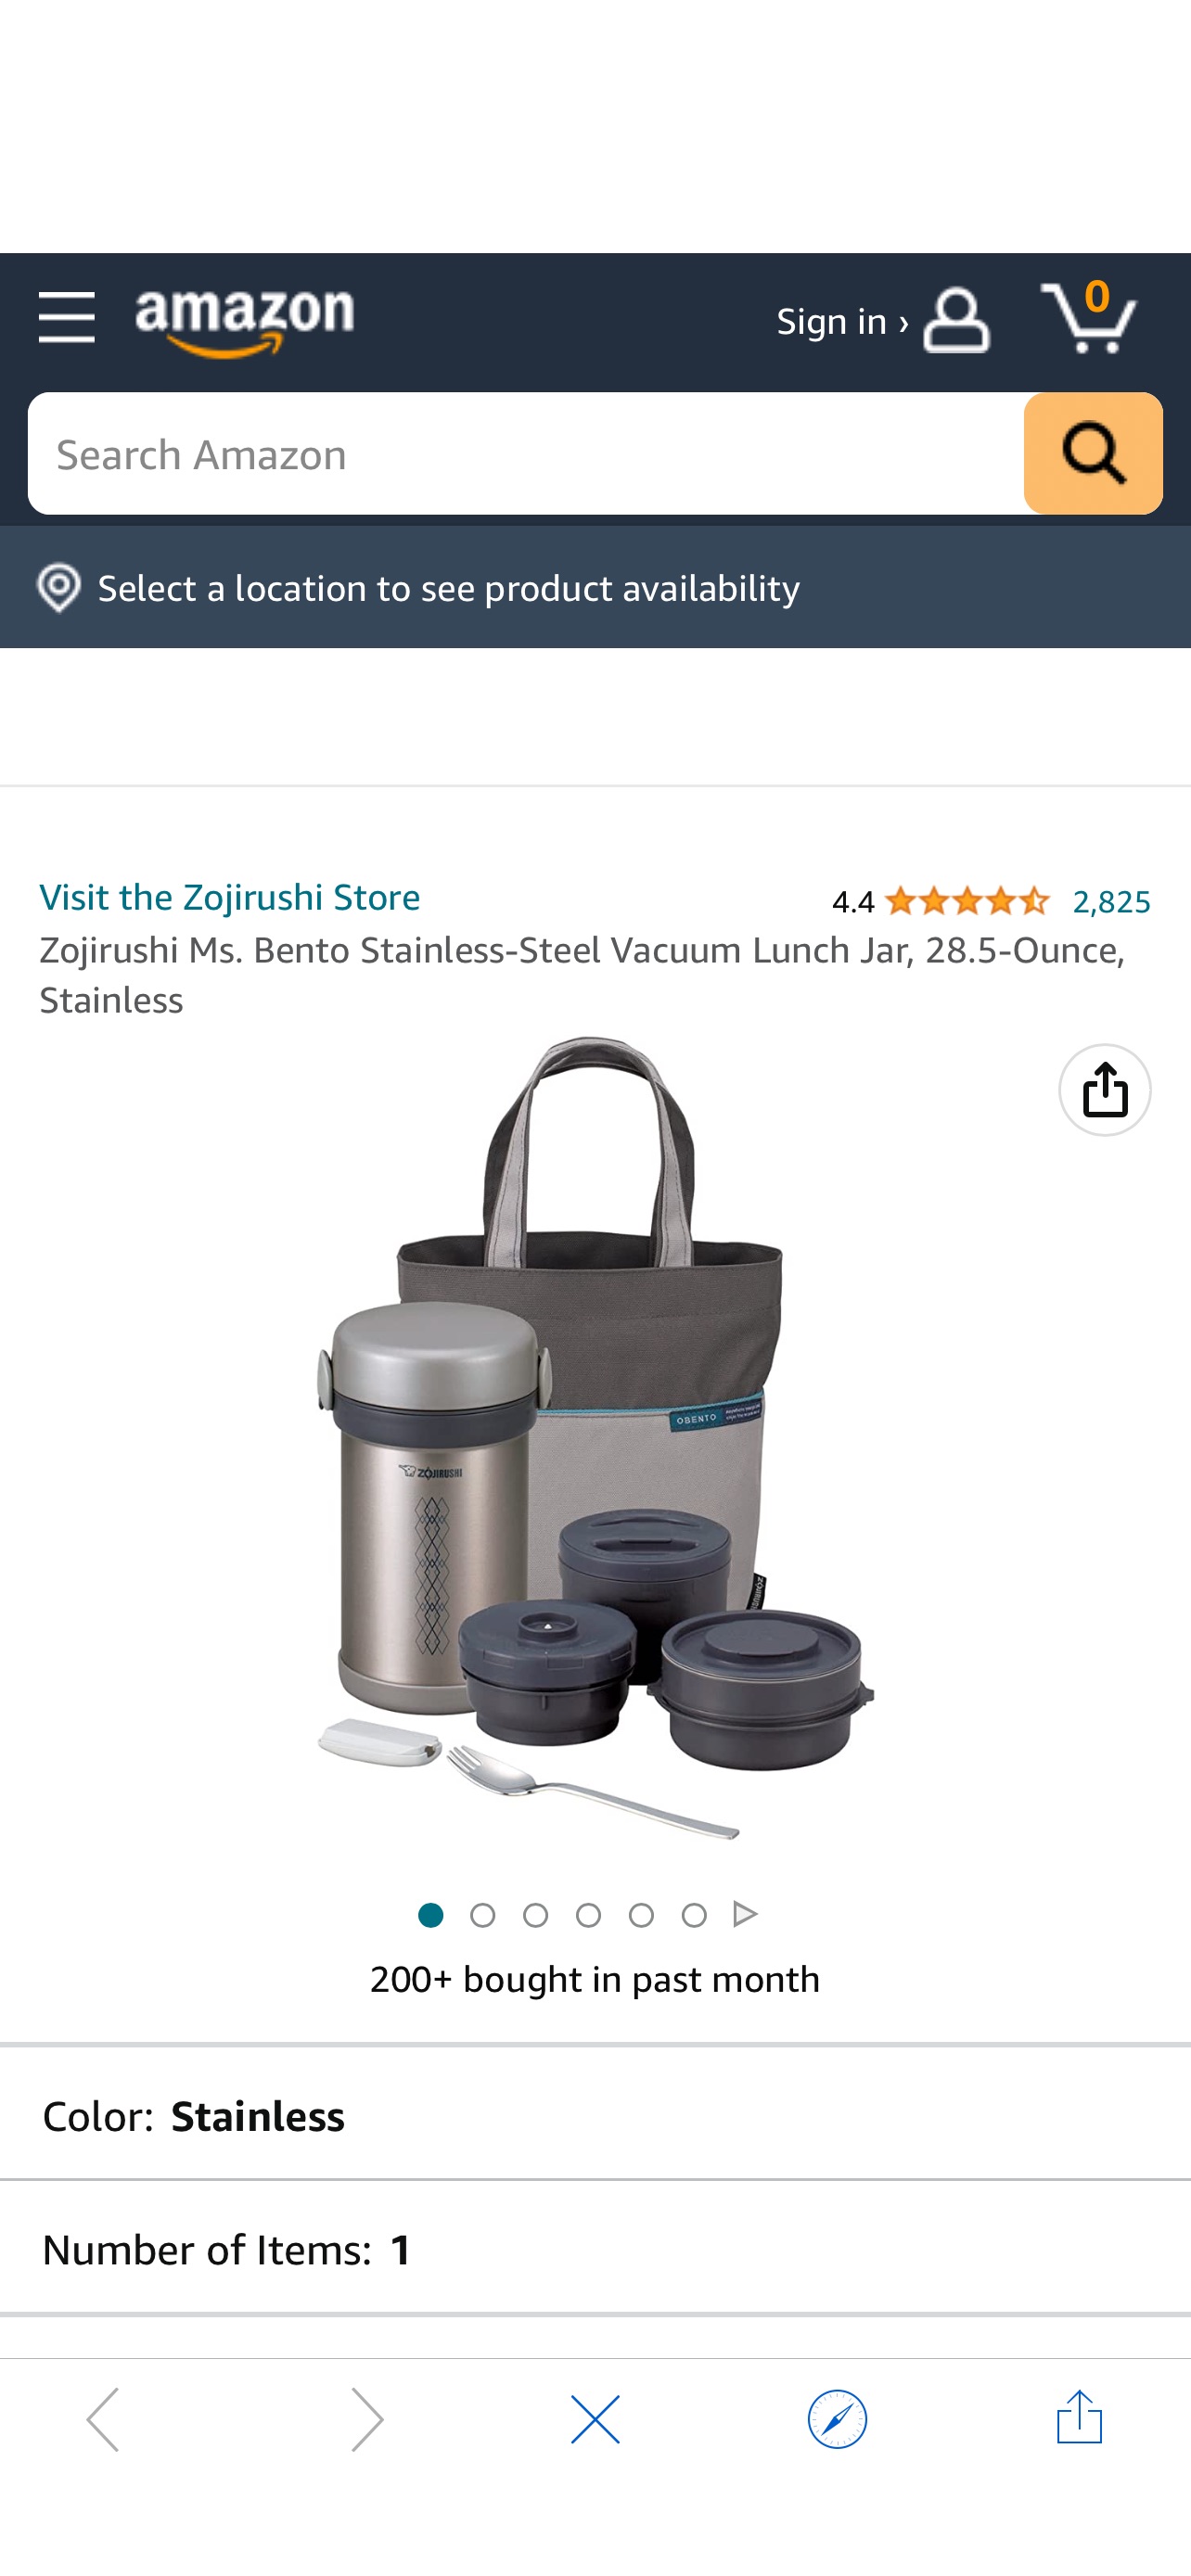 Amazon.com: Zojirushi Ms. Bento Stainless-Steel Vacuum Lunch Jar, 28.5-Ounce, Stainless : Home & Kitchen